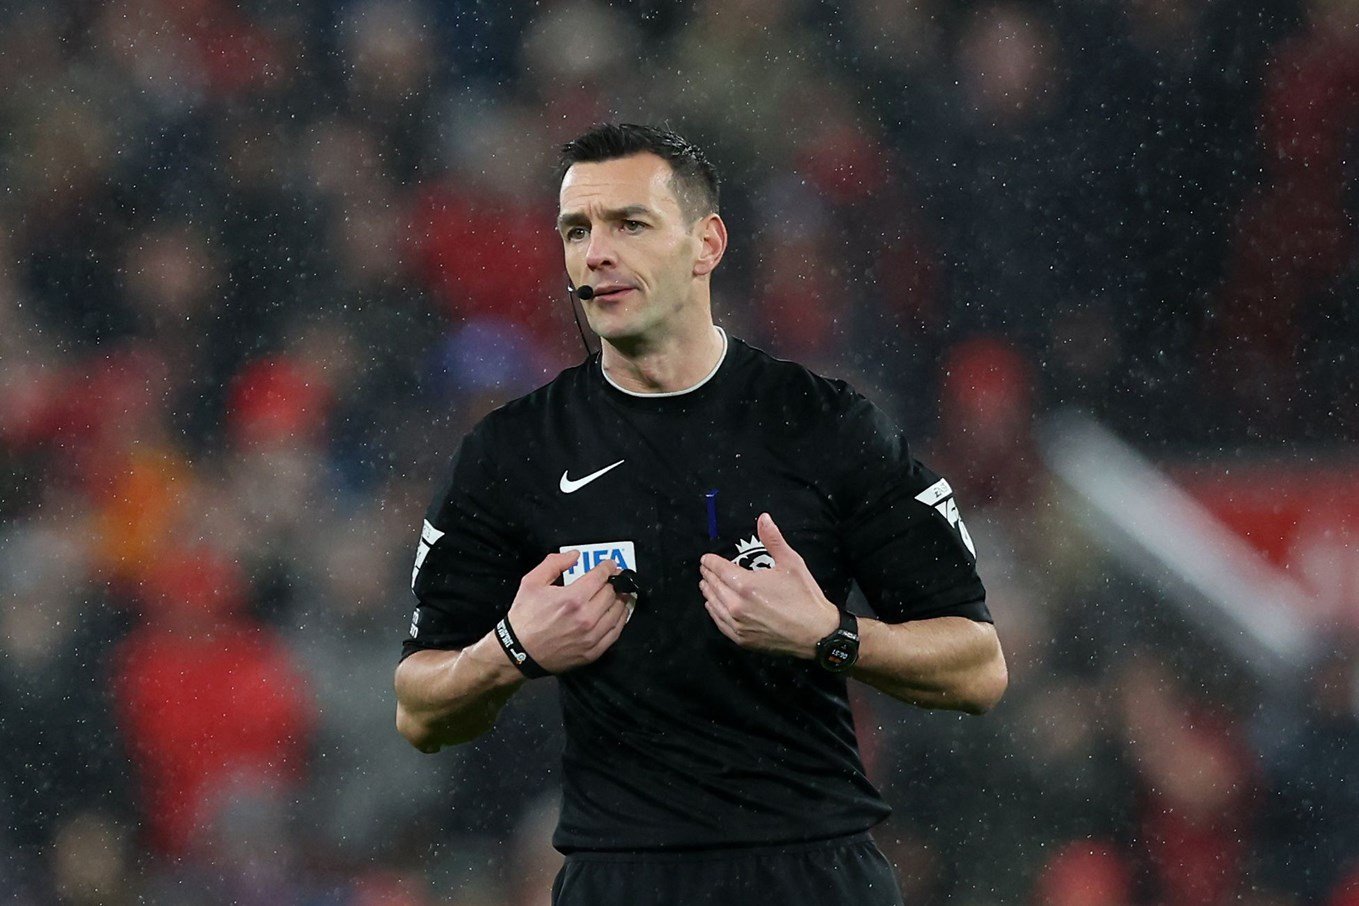 Referee Andy Madley officiating our game at Liverpool.